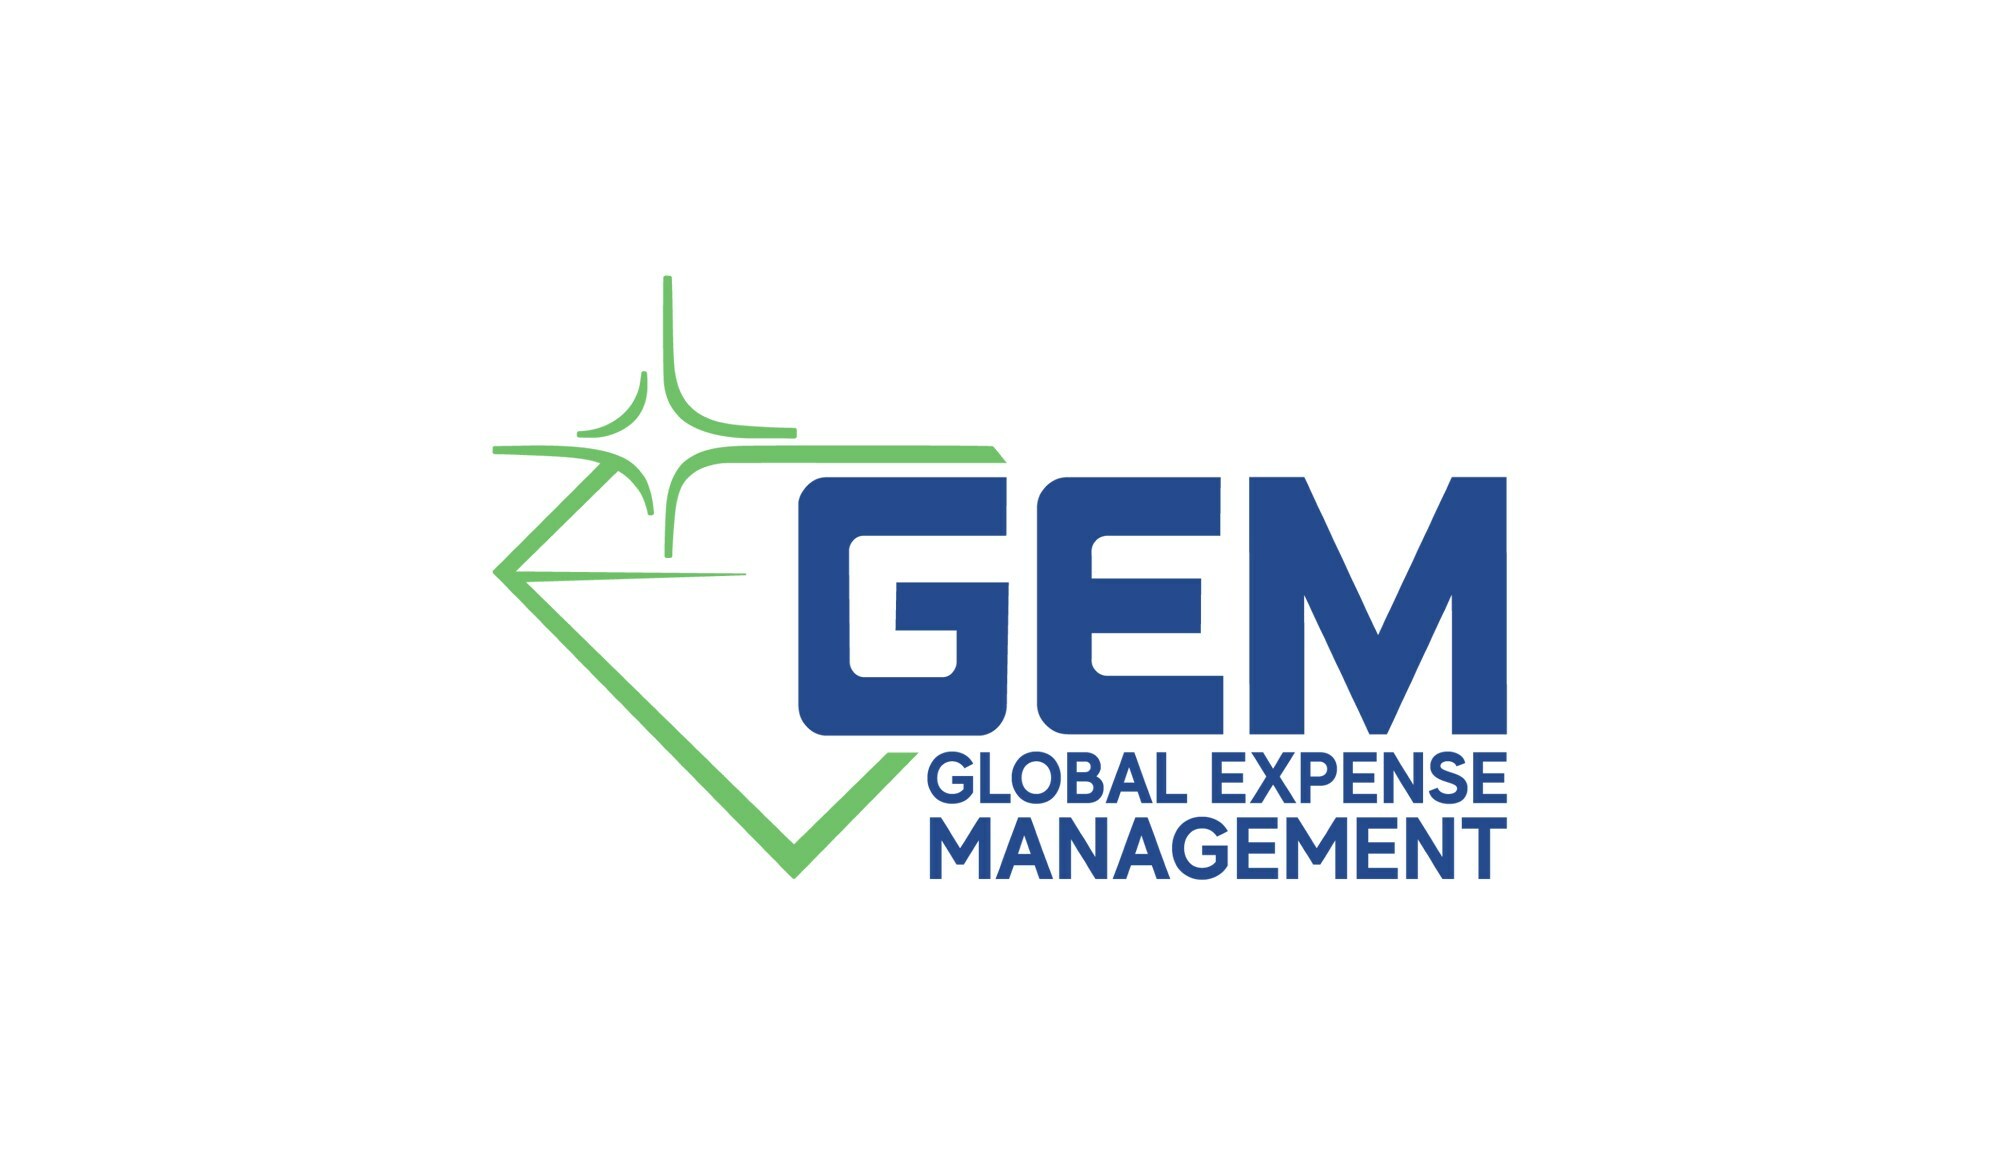 Streamline expenses and operations for maximum efficiency with Velocity’s Global Expense Management (GEM) solution.